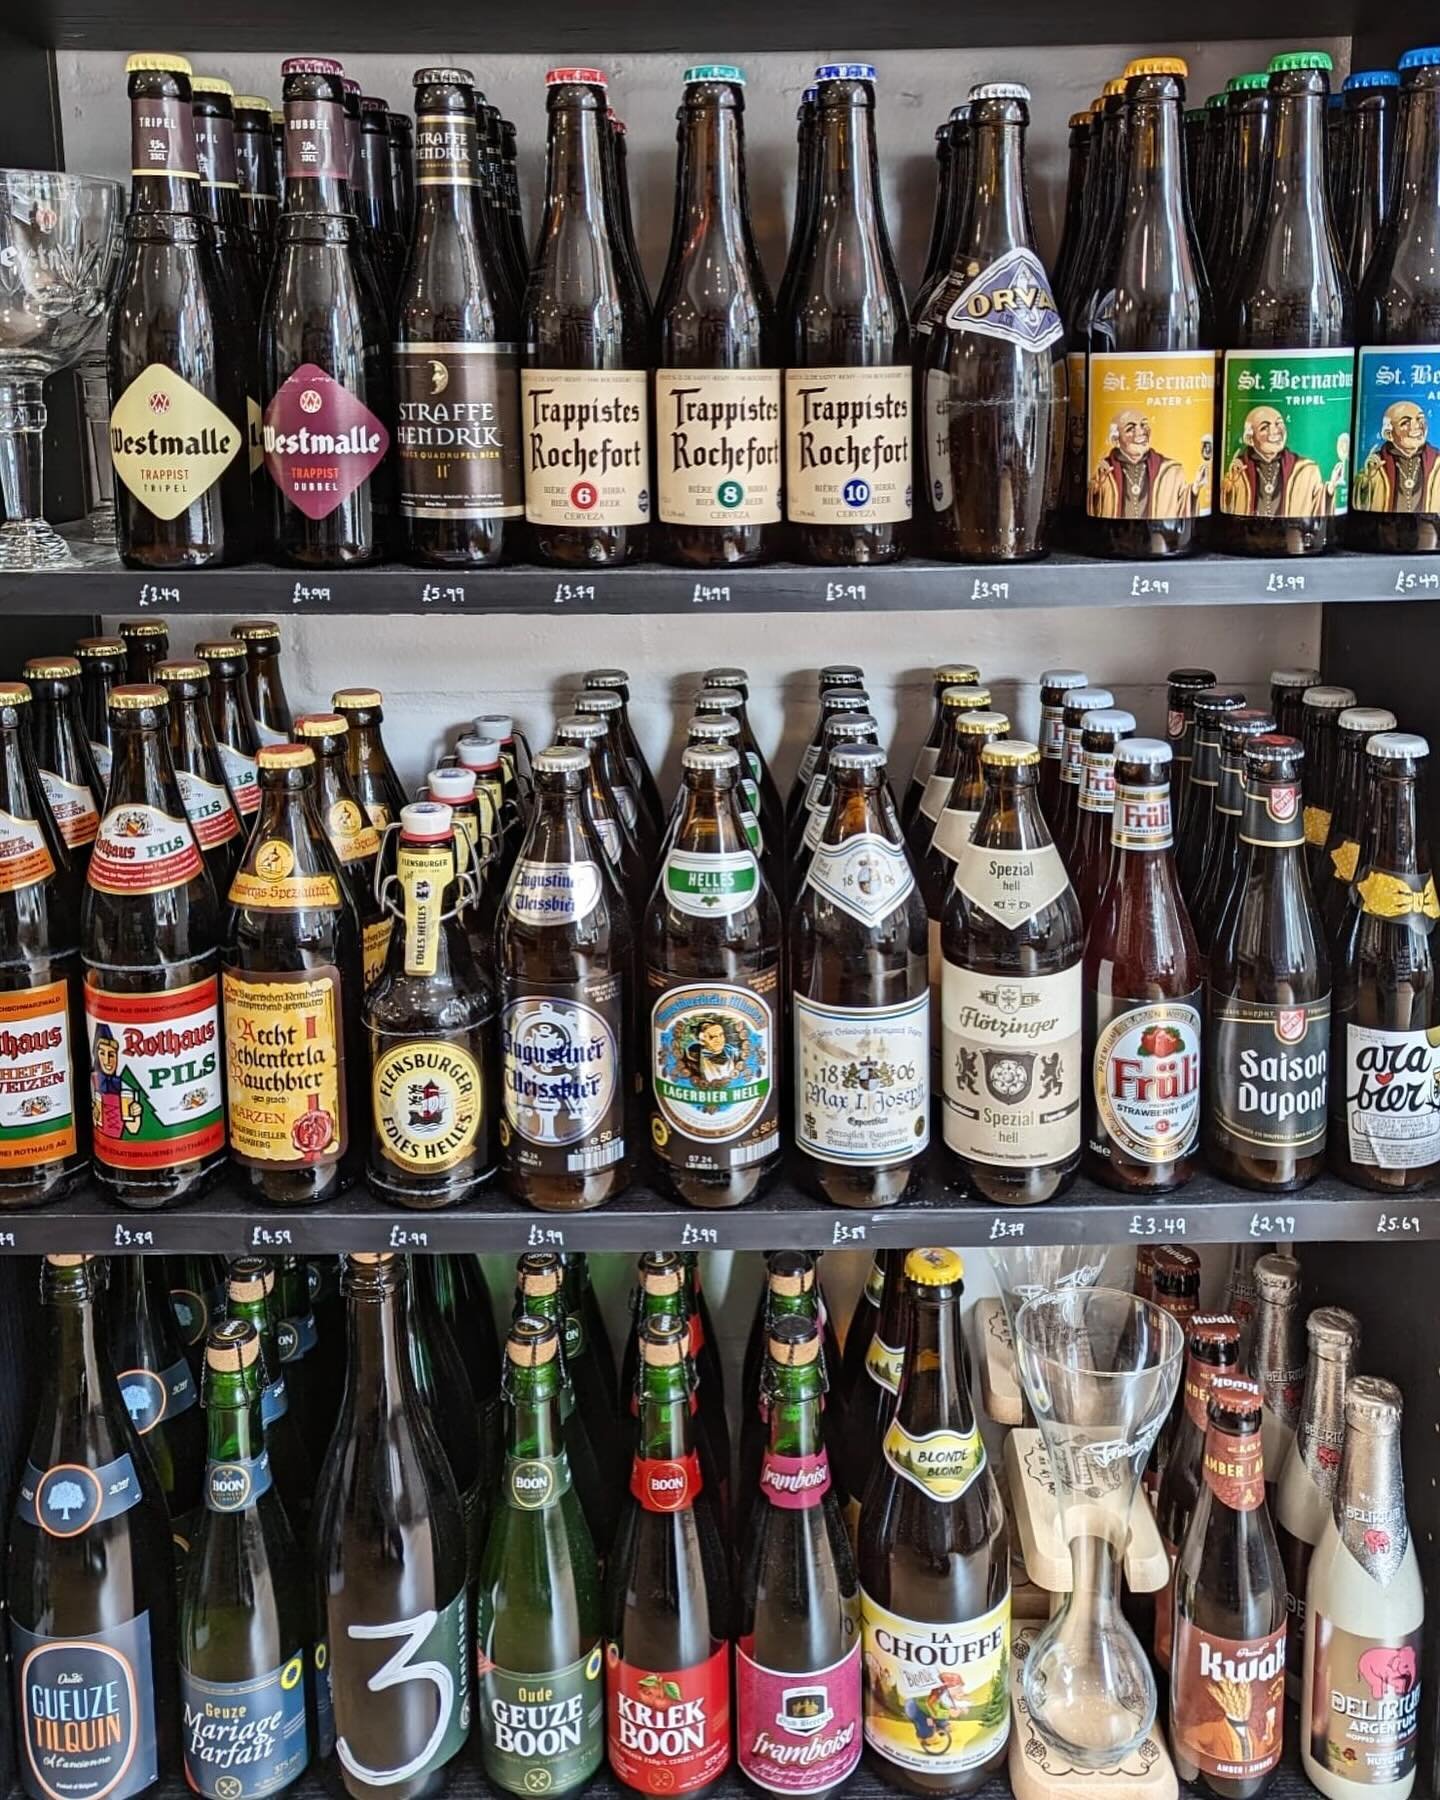 Cheers! Prost! Sant&eacute;! 🍻 
Our European beer section is shaping up nicely but we wanted to ask those of you who love a good German or Belgian beer, what else would you like to see in this set?

#prost #sant&eacute; #cheers #belgianbeer #germanb